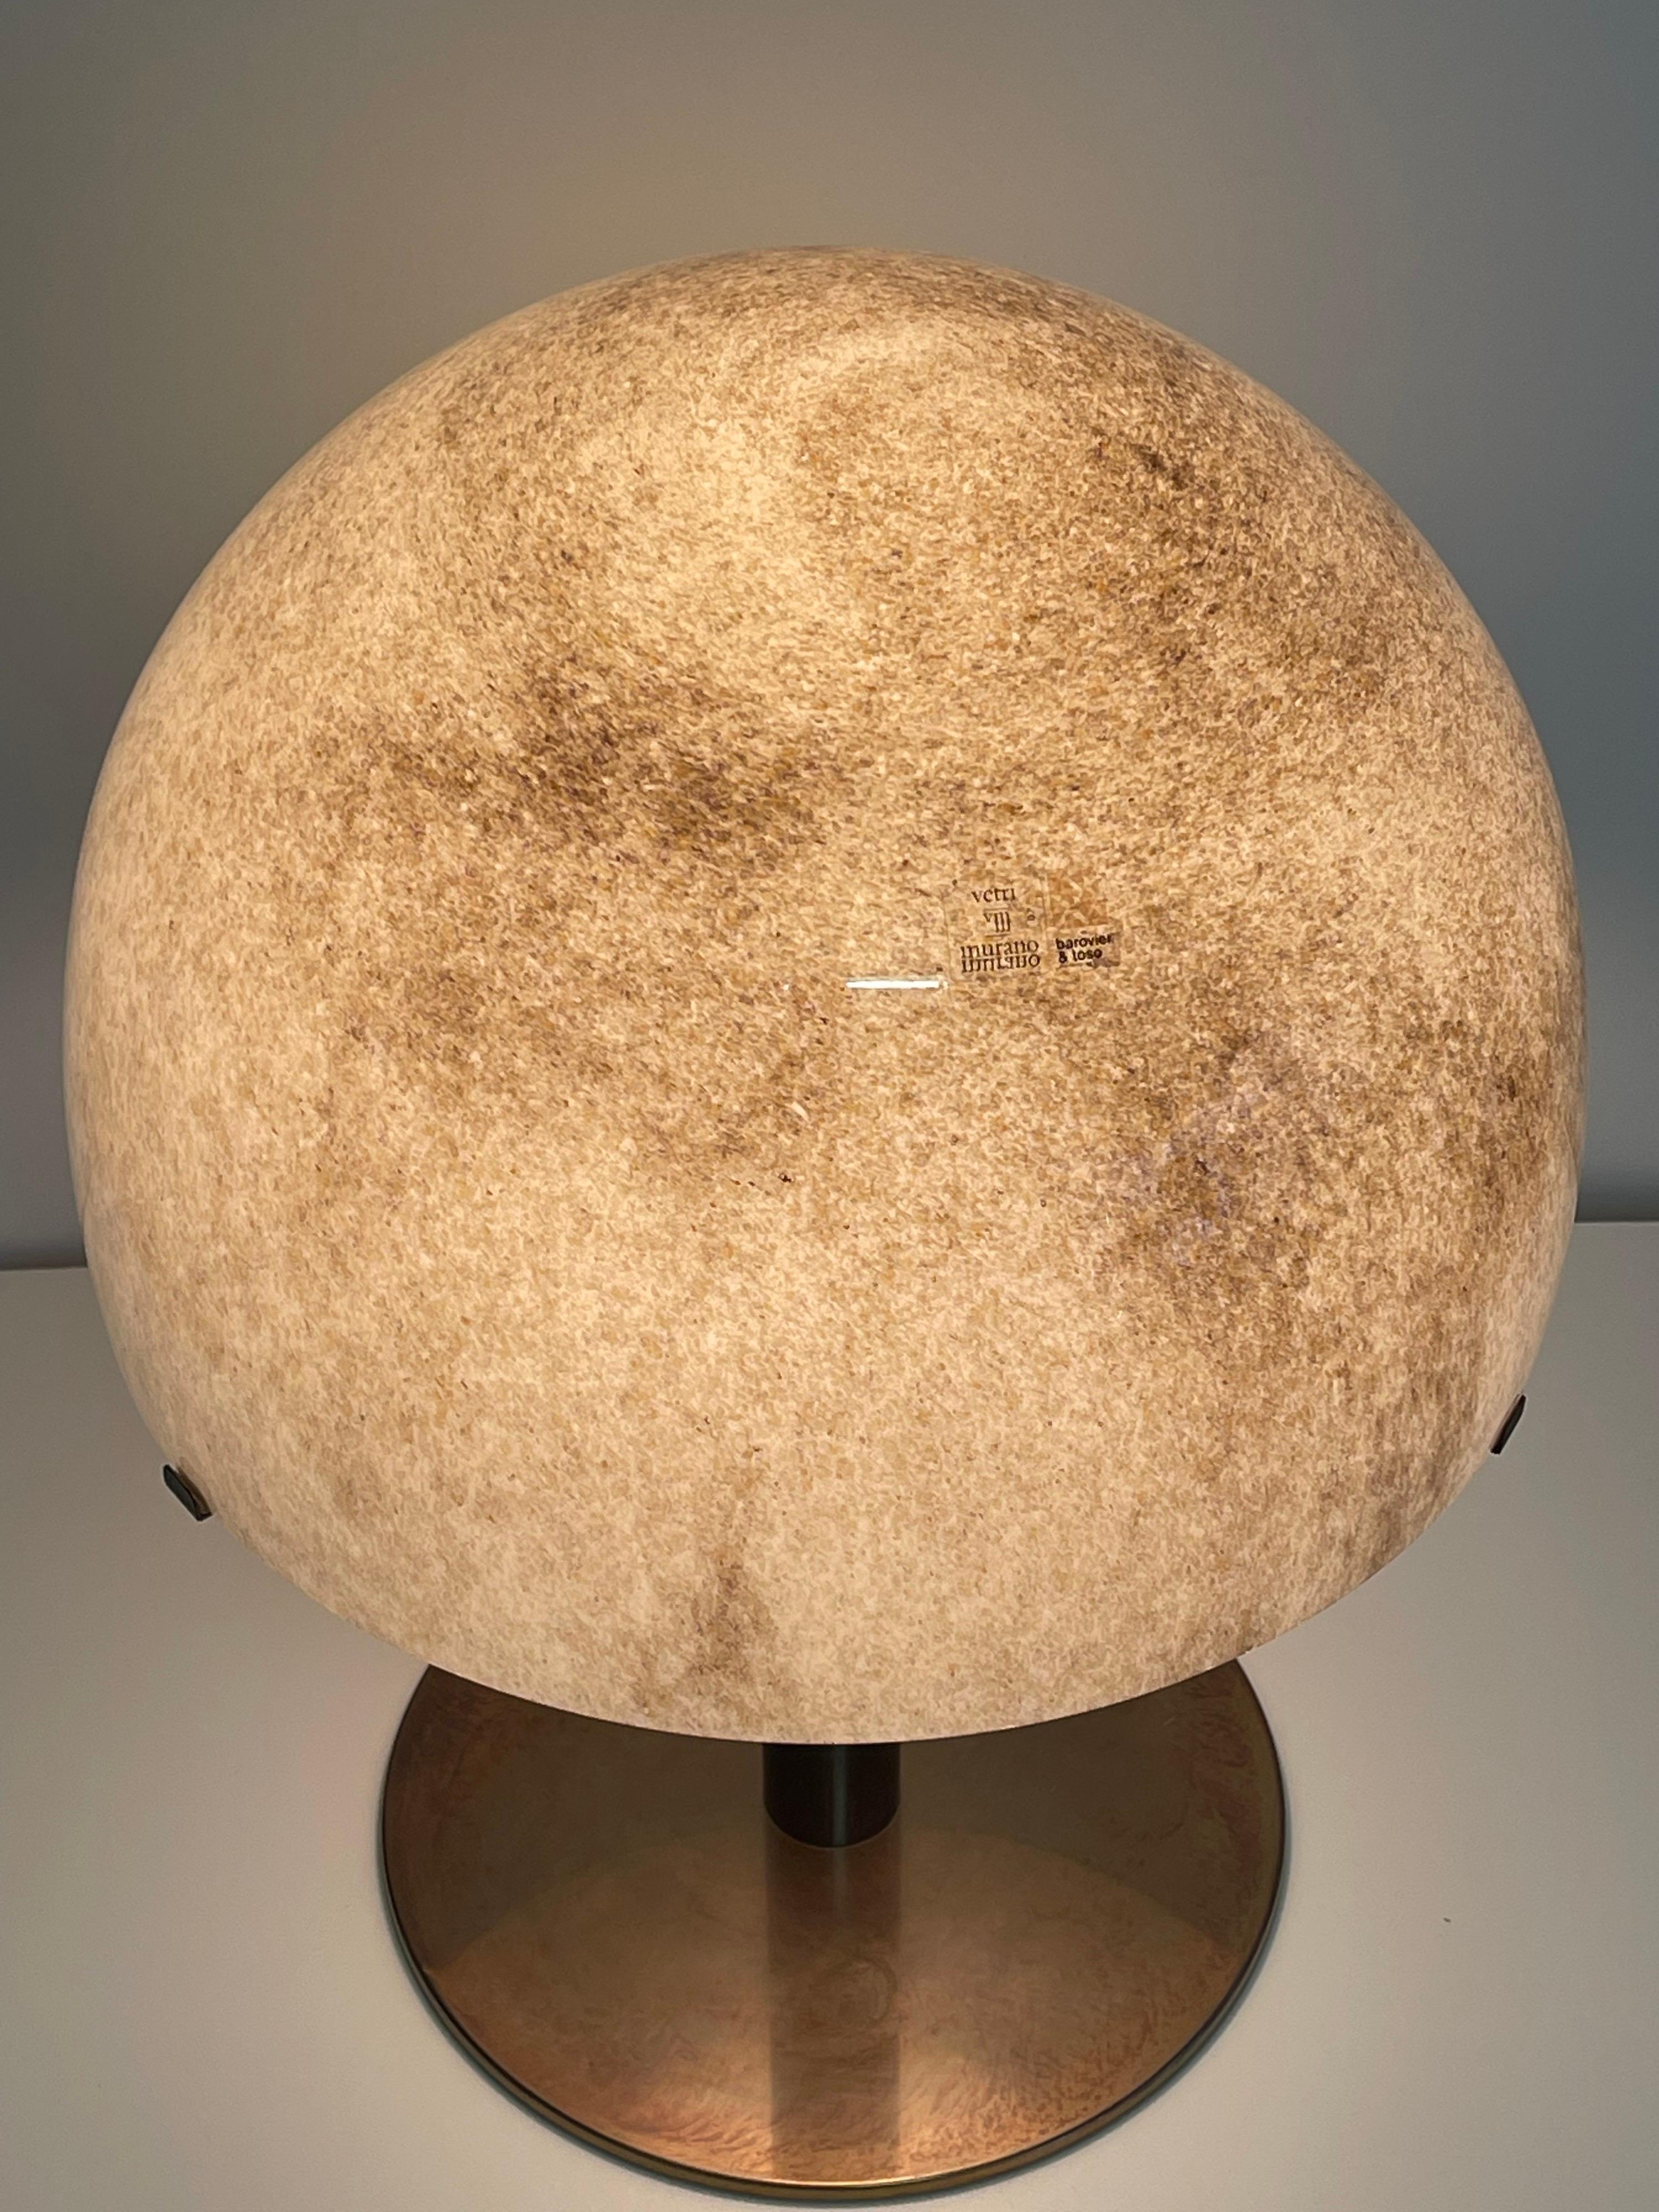 Large Murano Glas and Brass Mushroom Table Lamp by Barovier & Toso, ca. 1960s In Good Condition For Sale In Wiesbaden, Hessen